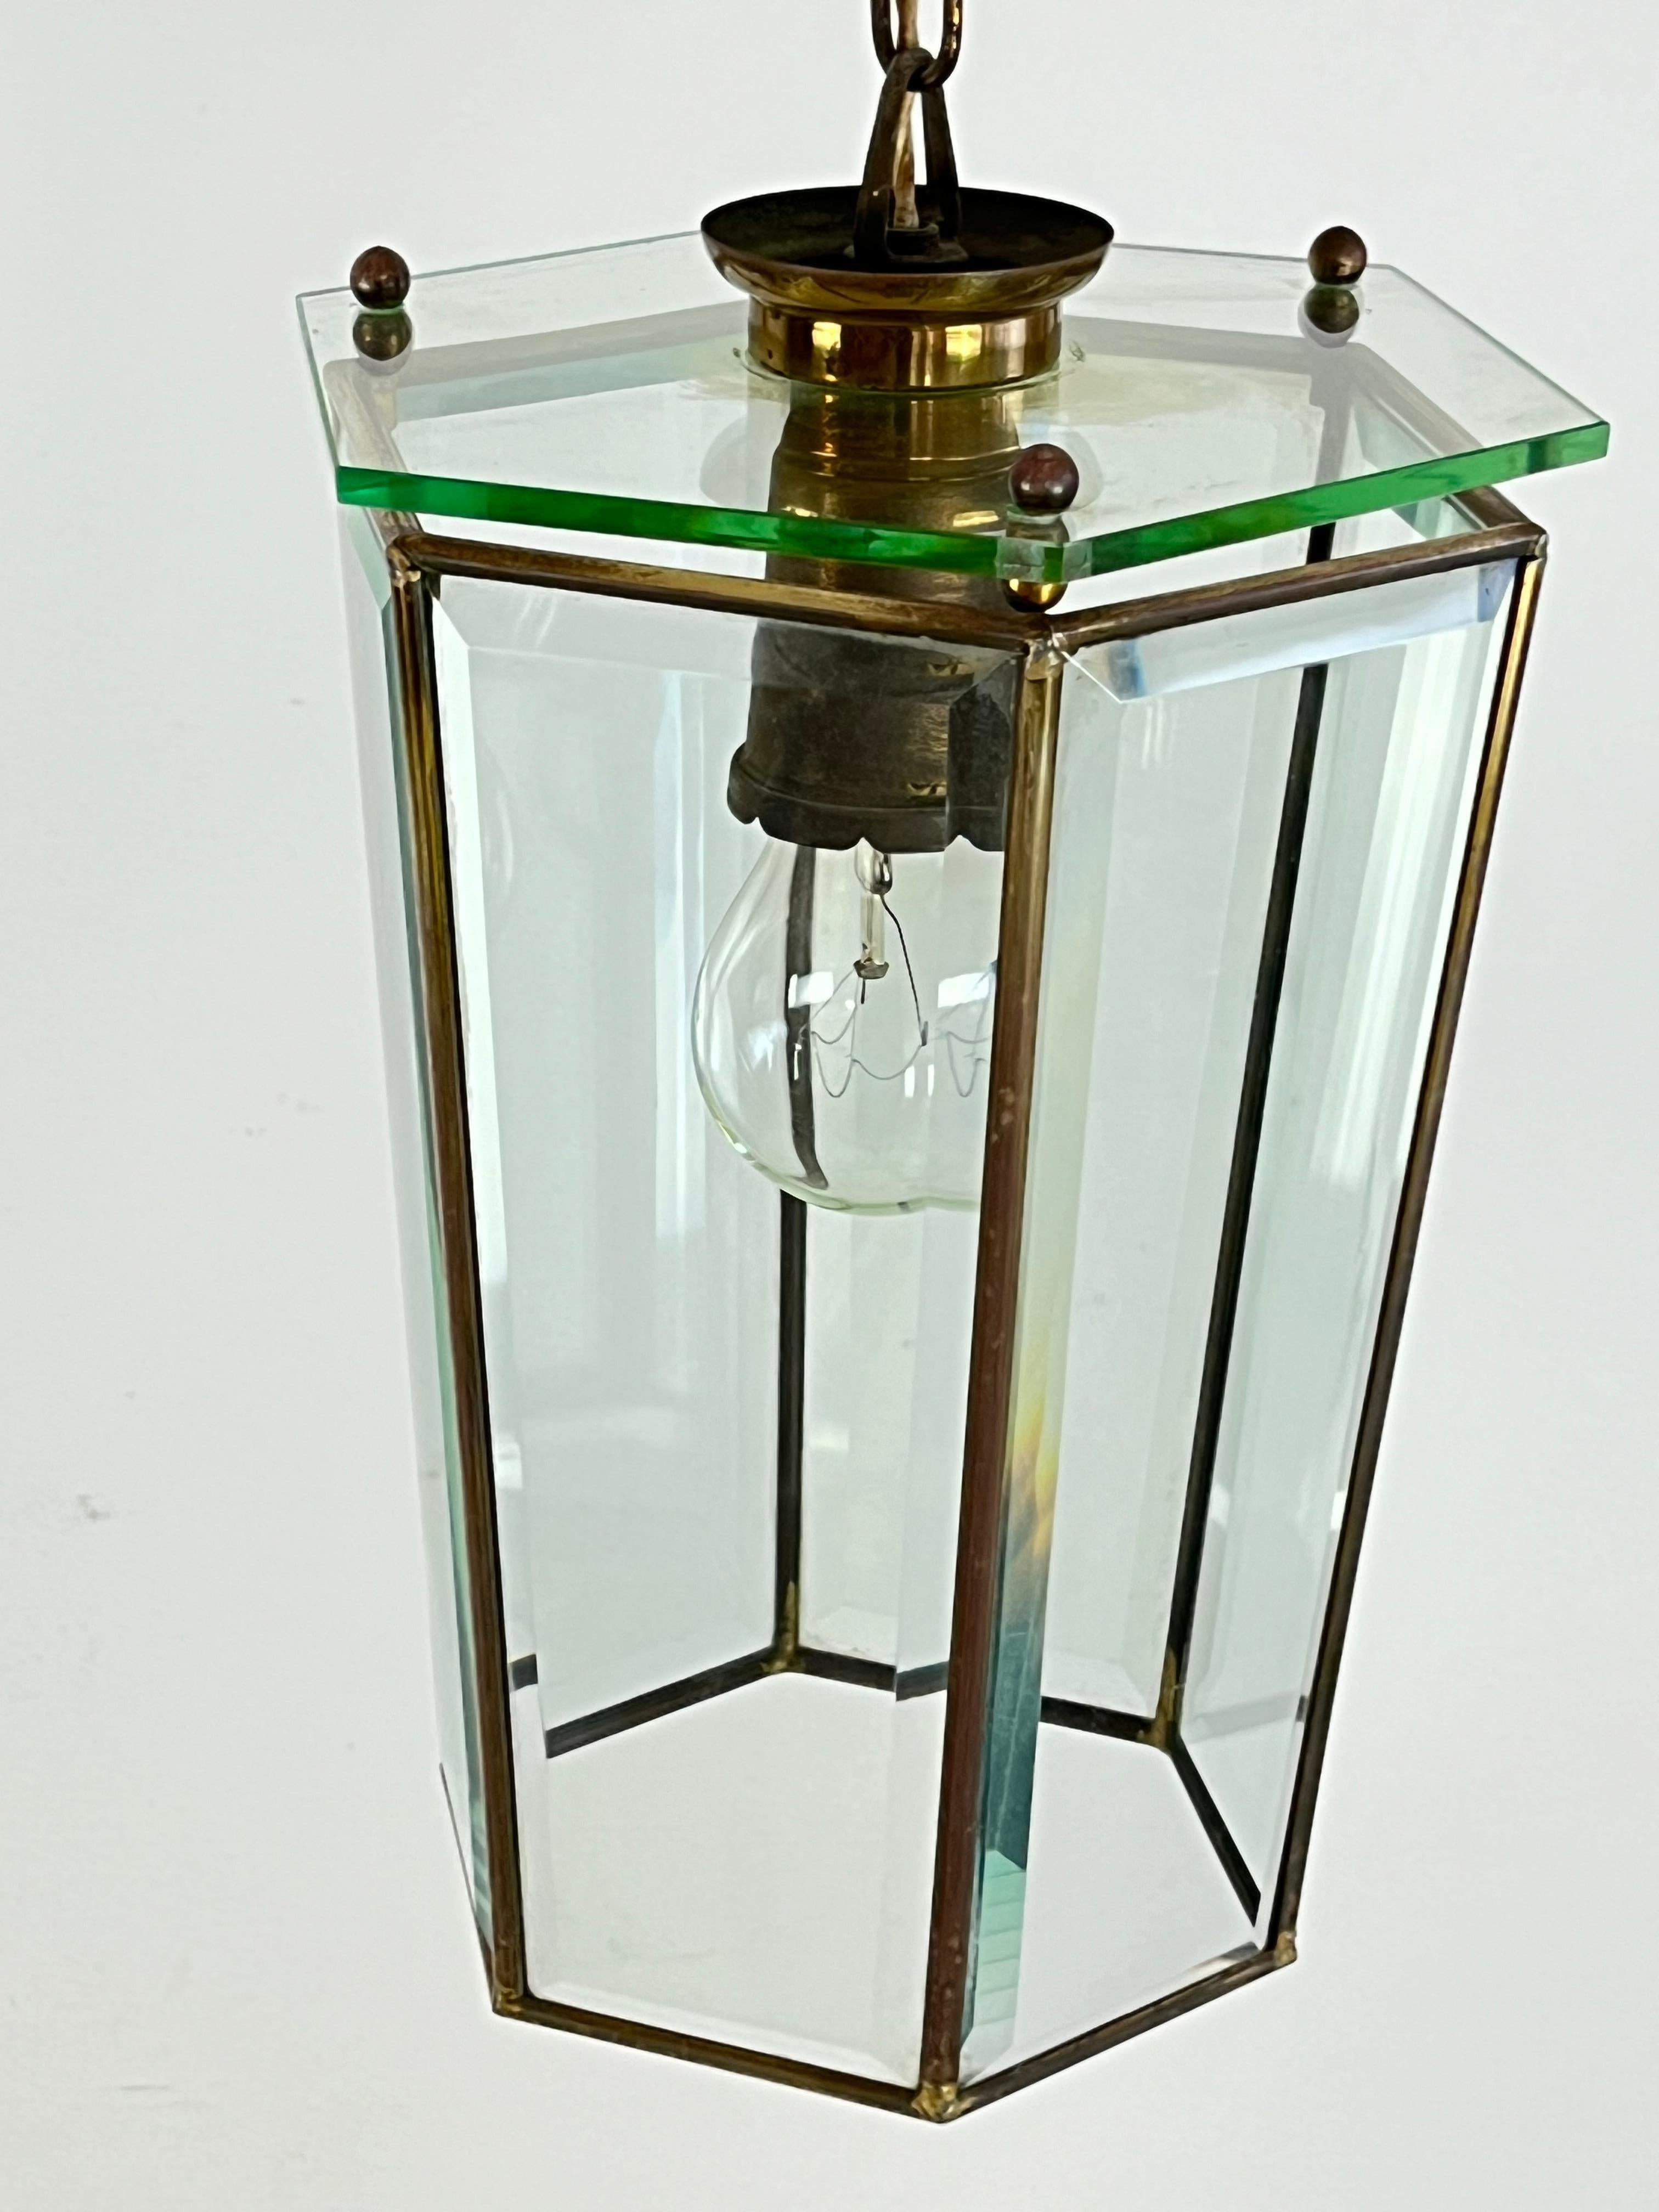 Brass and cut glass pendant lamp, attributed to Adolf Loos, Austria, 1930s
It is in good condition and working. E27 lamp.
The chandelier measures 21 cm x 18 cm x 30 cm high (98 cm with the chain).

 Loos thought that ornament was a form of slavery